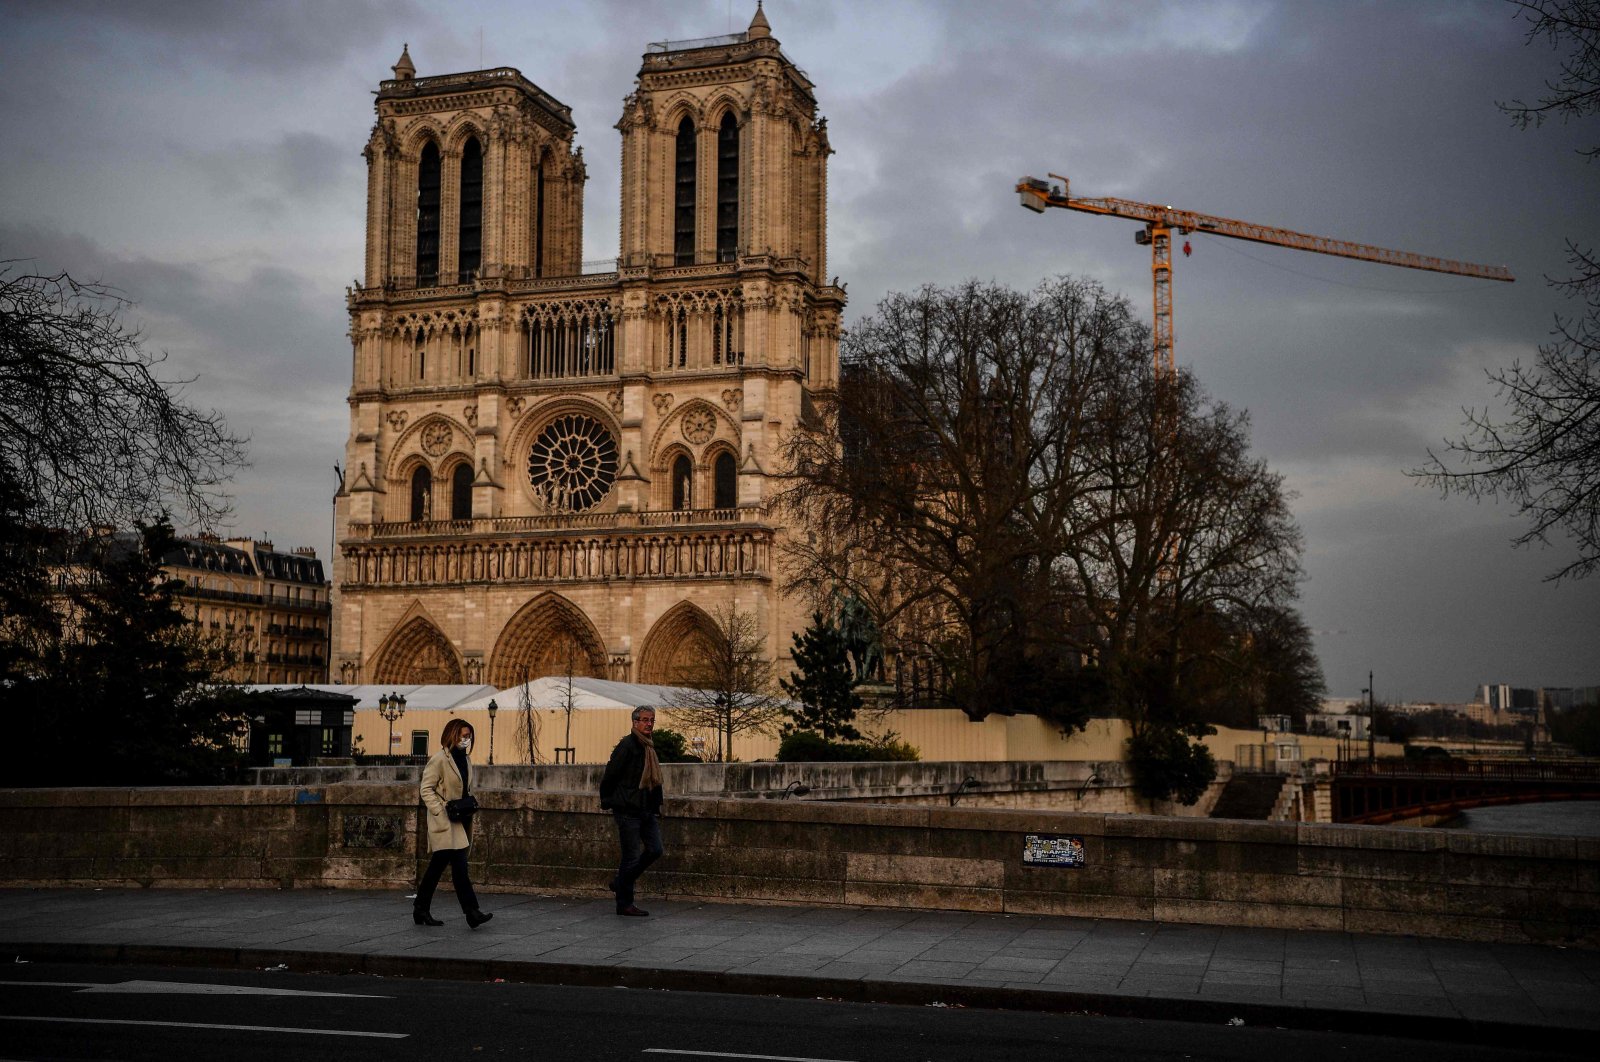 In this file photograph taken on March 17, 2020, a woman wearing a protective face mask and a man walk on a bridge over the Seine river near the Notre Dame de Paris cathedral in Paris. (AFP)